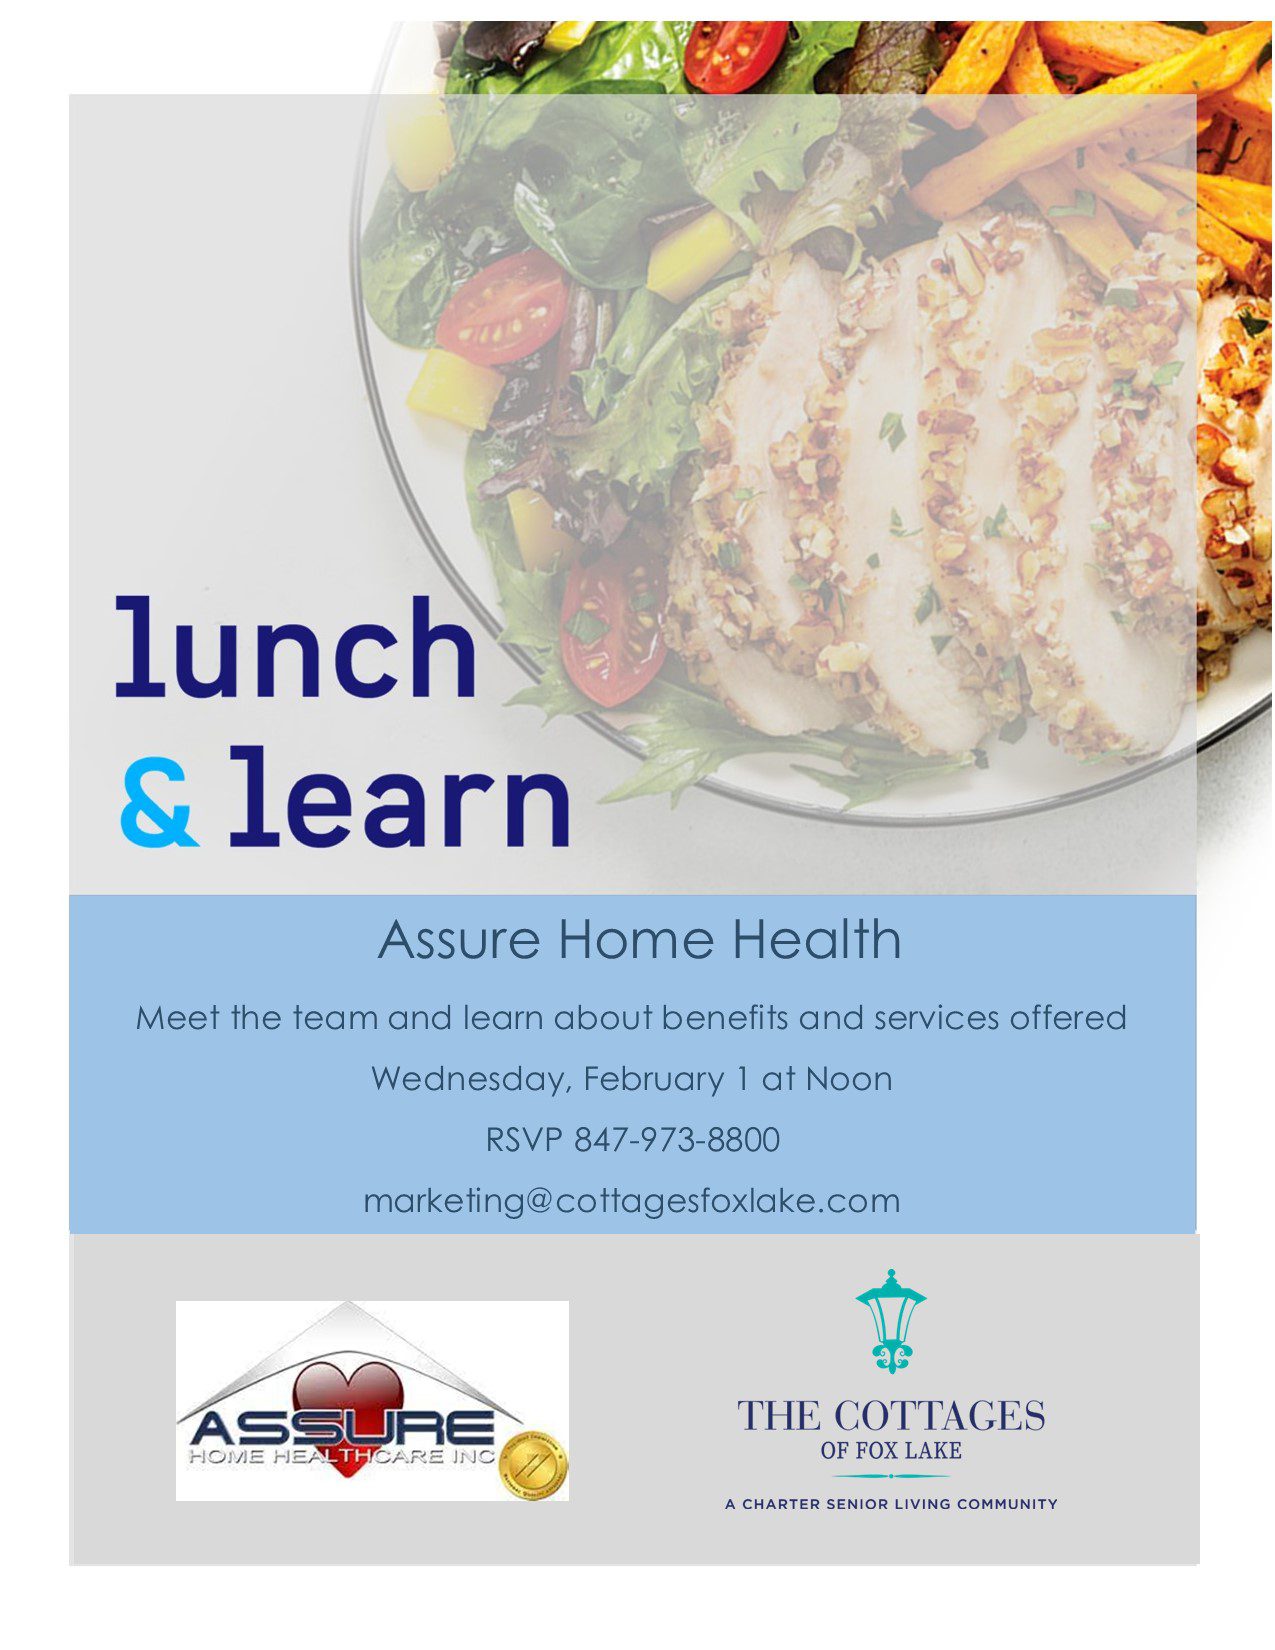 Cottages of Fox Lake - Assisted Living and Memory Care - Lunch & Learn